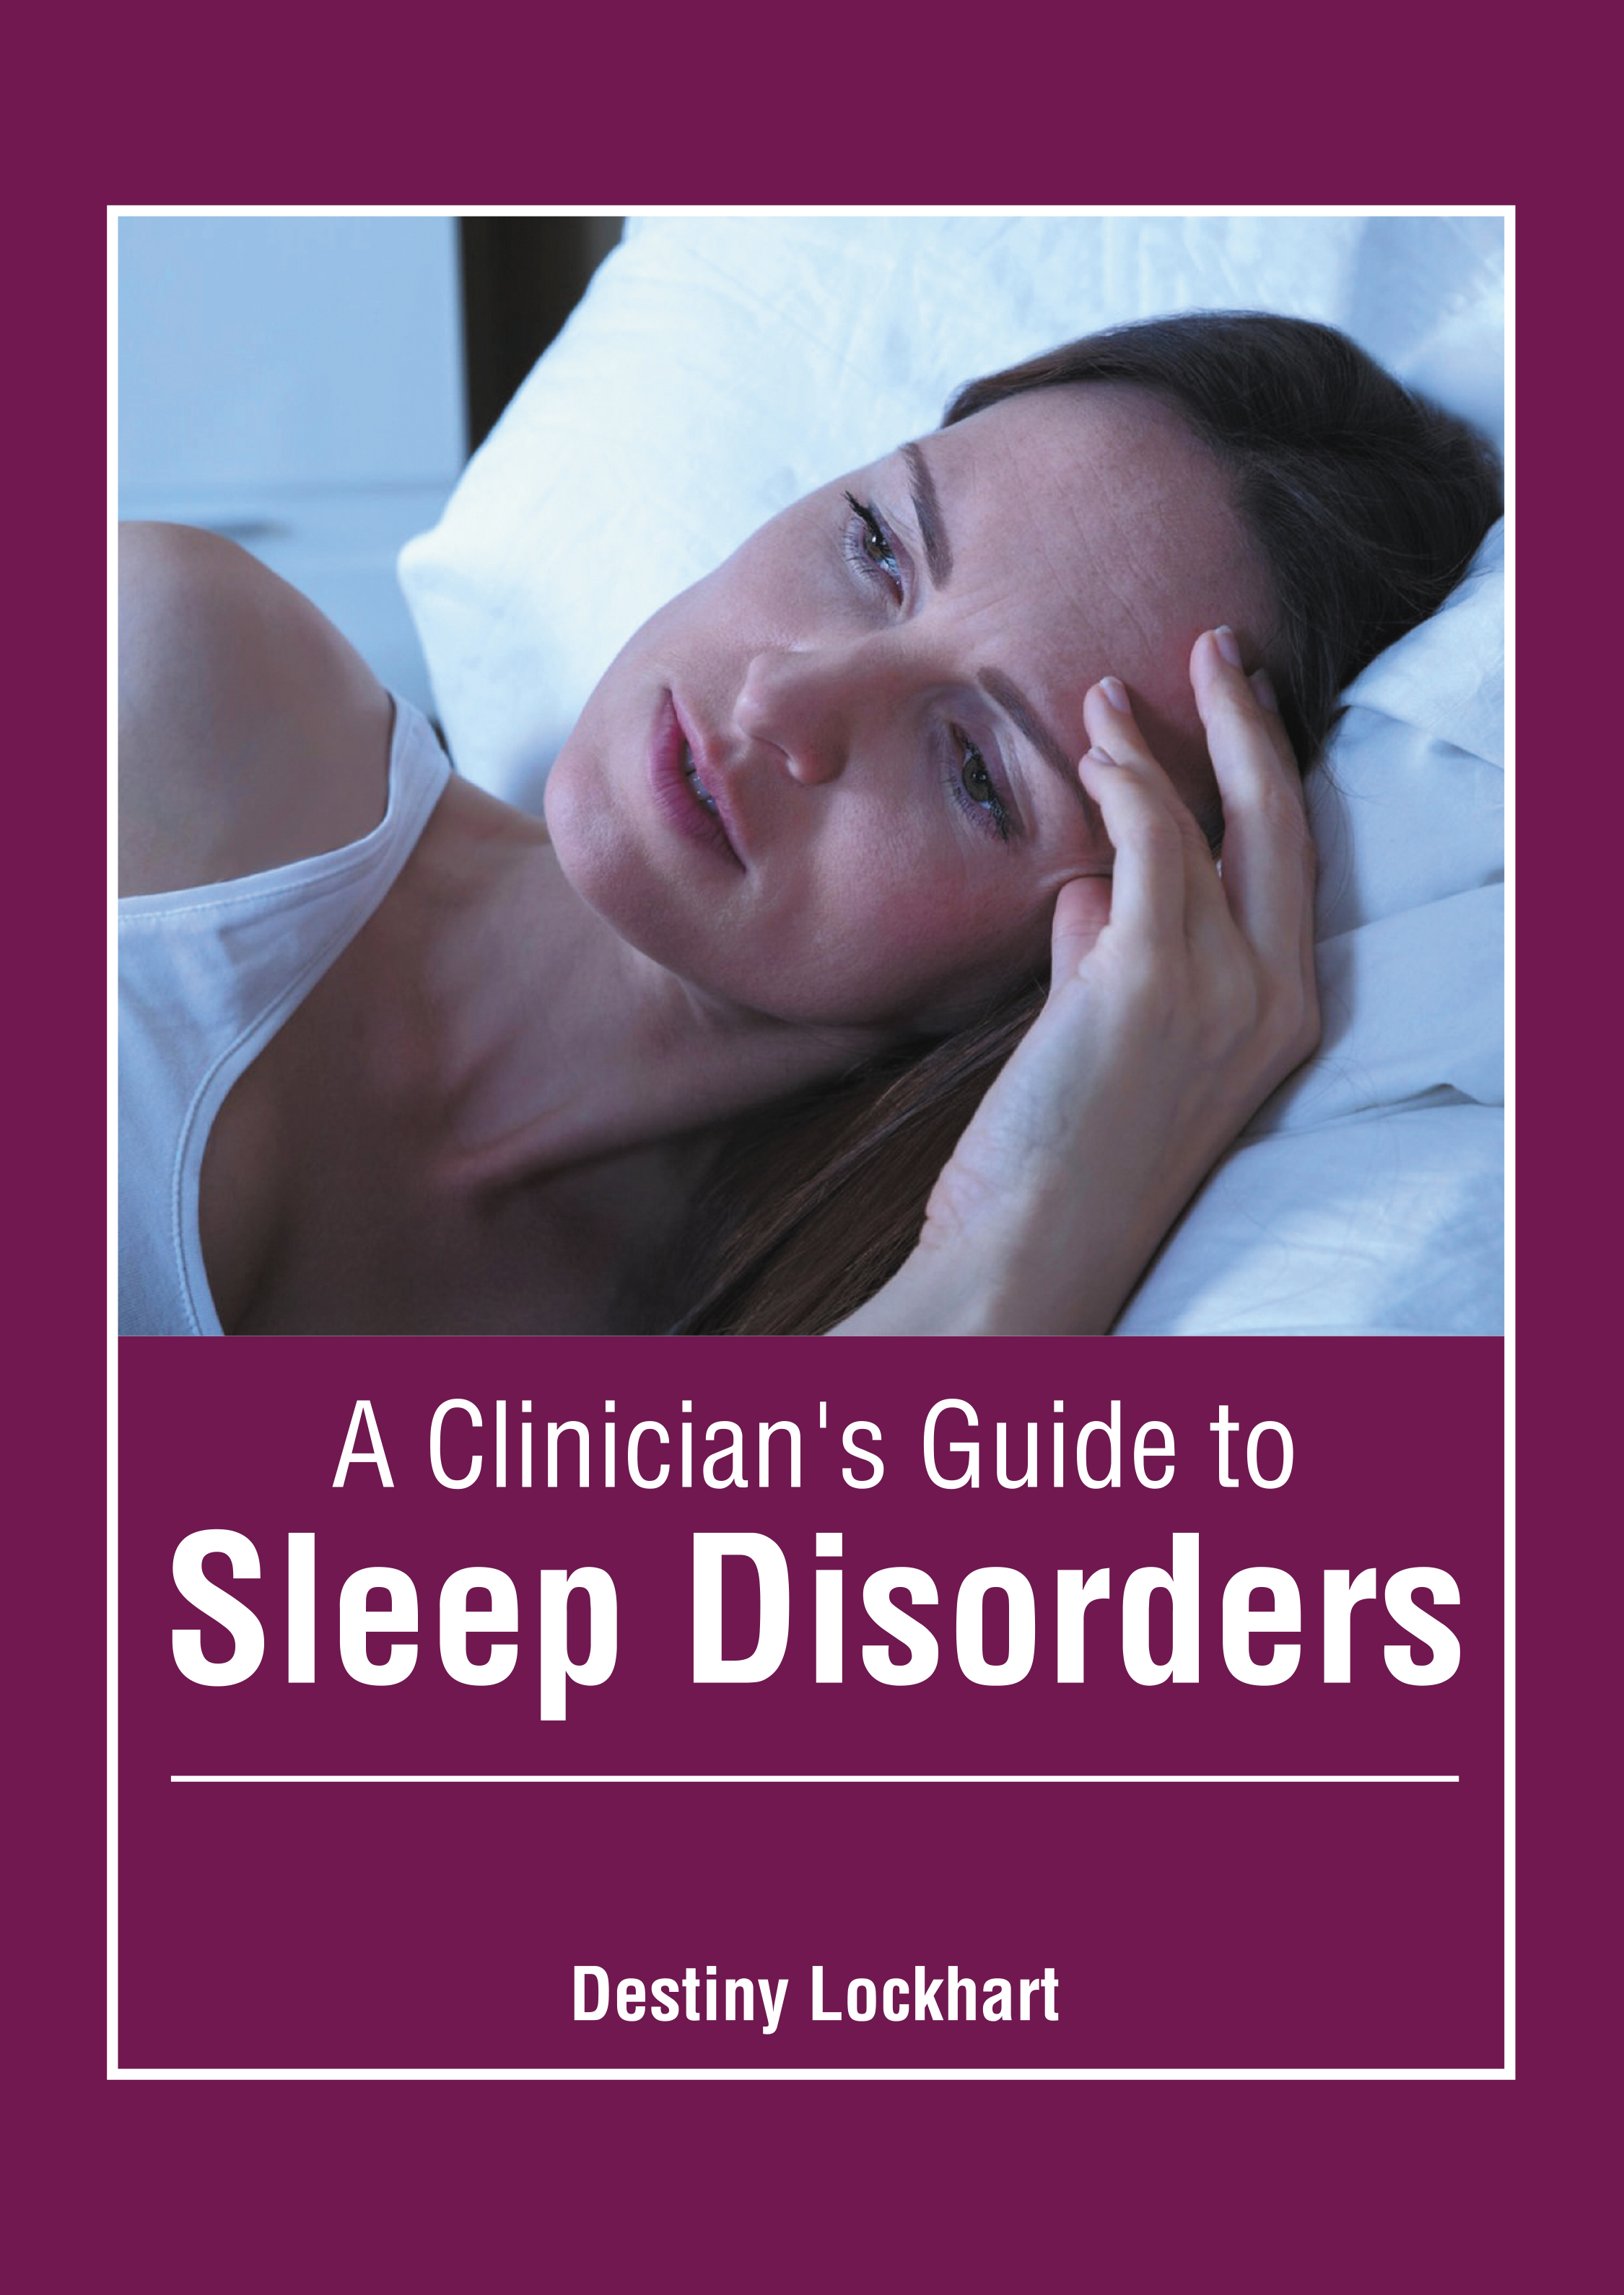 

exclusive-publishers/american-medical-publishers/a-clinician-s-guide-to-sleep-disorders-9781639270873